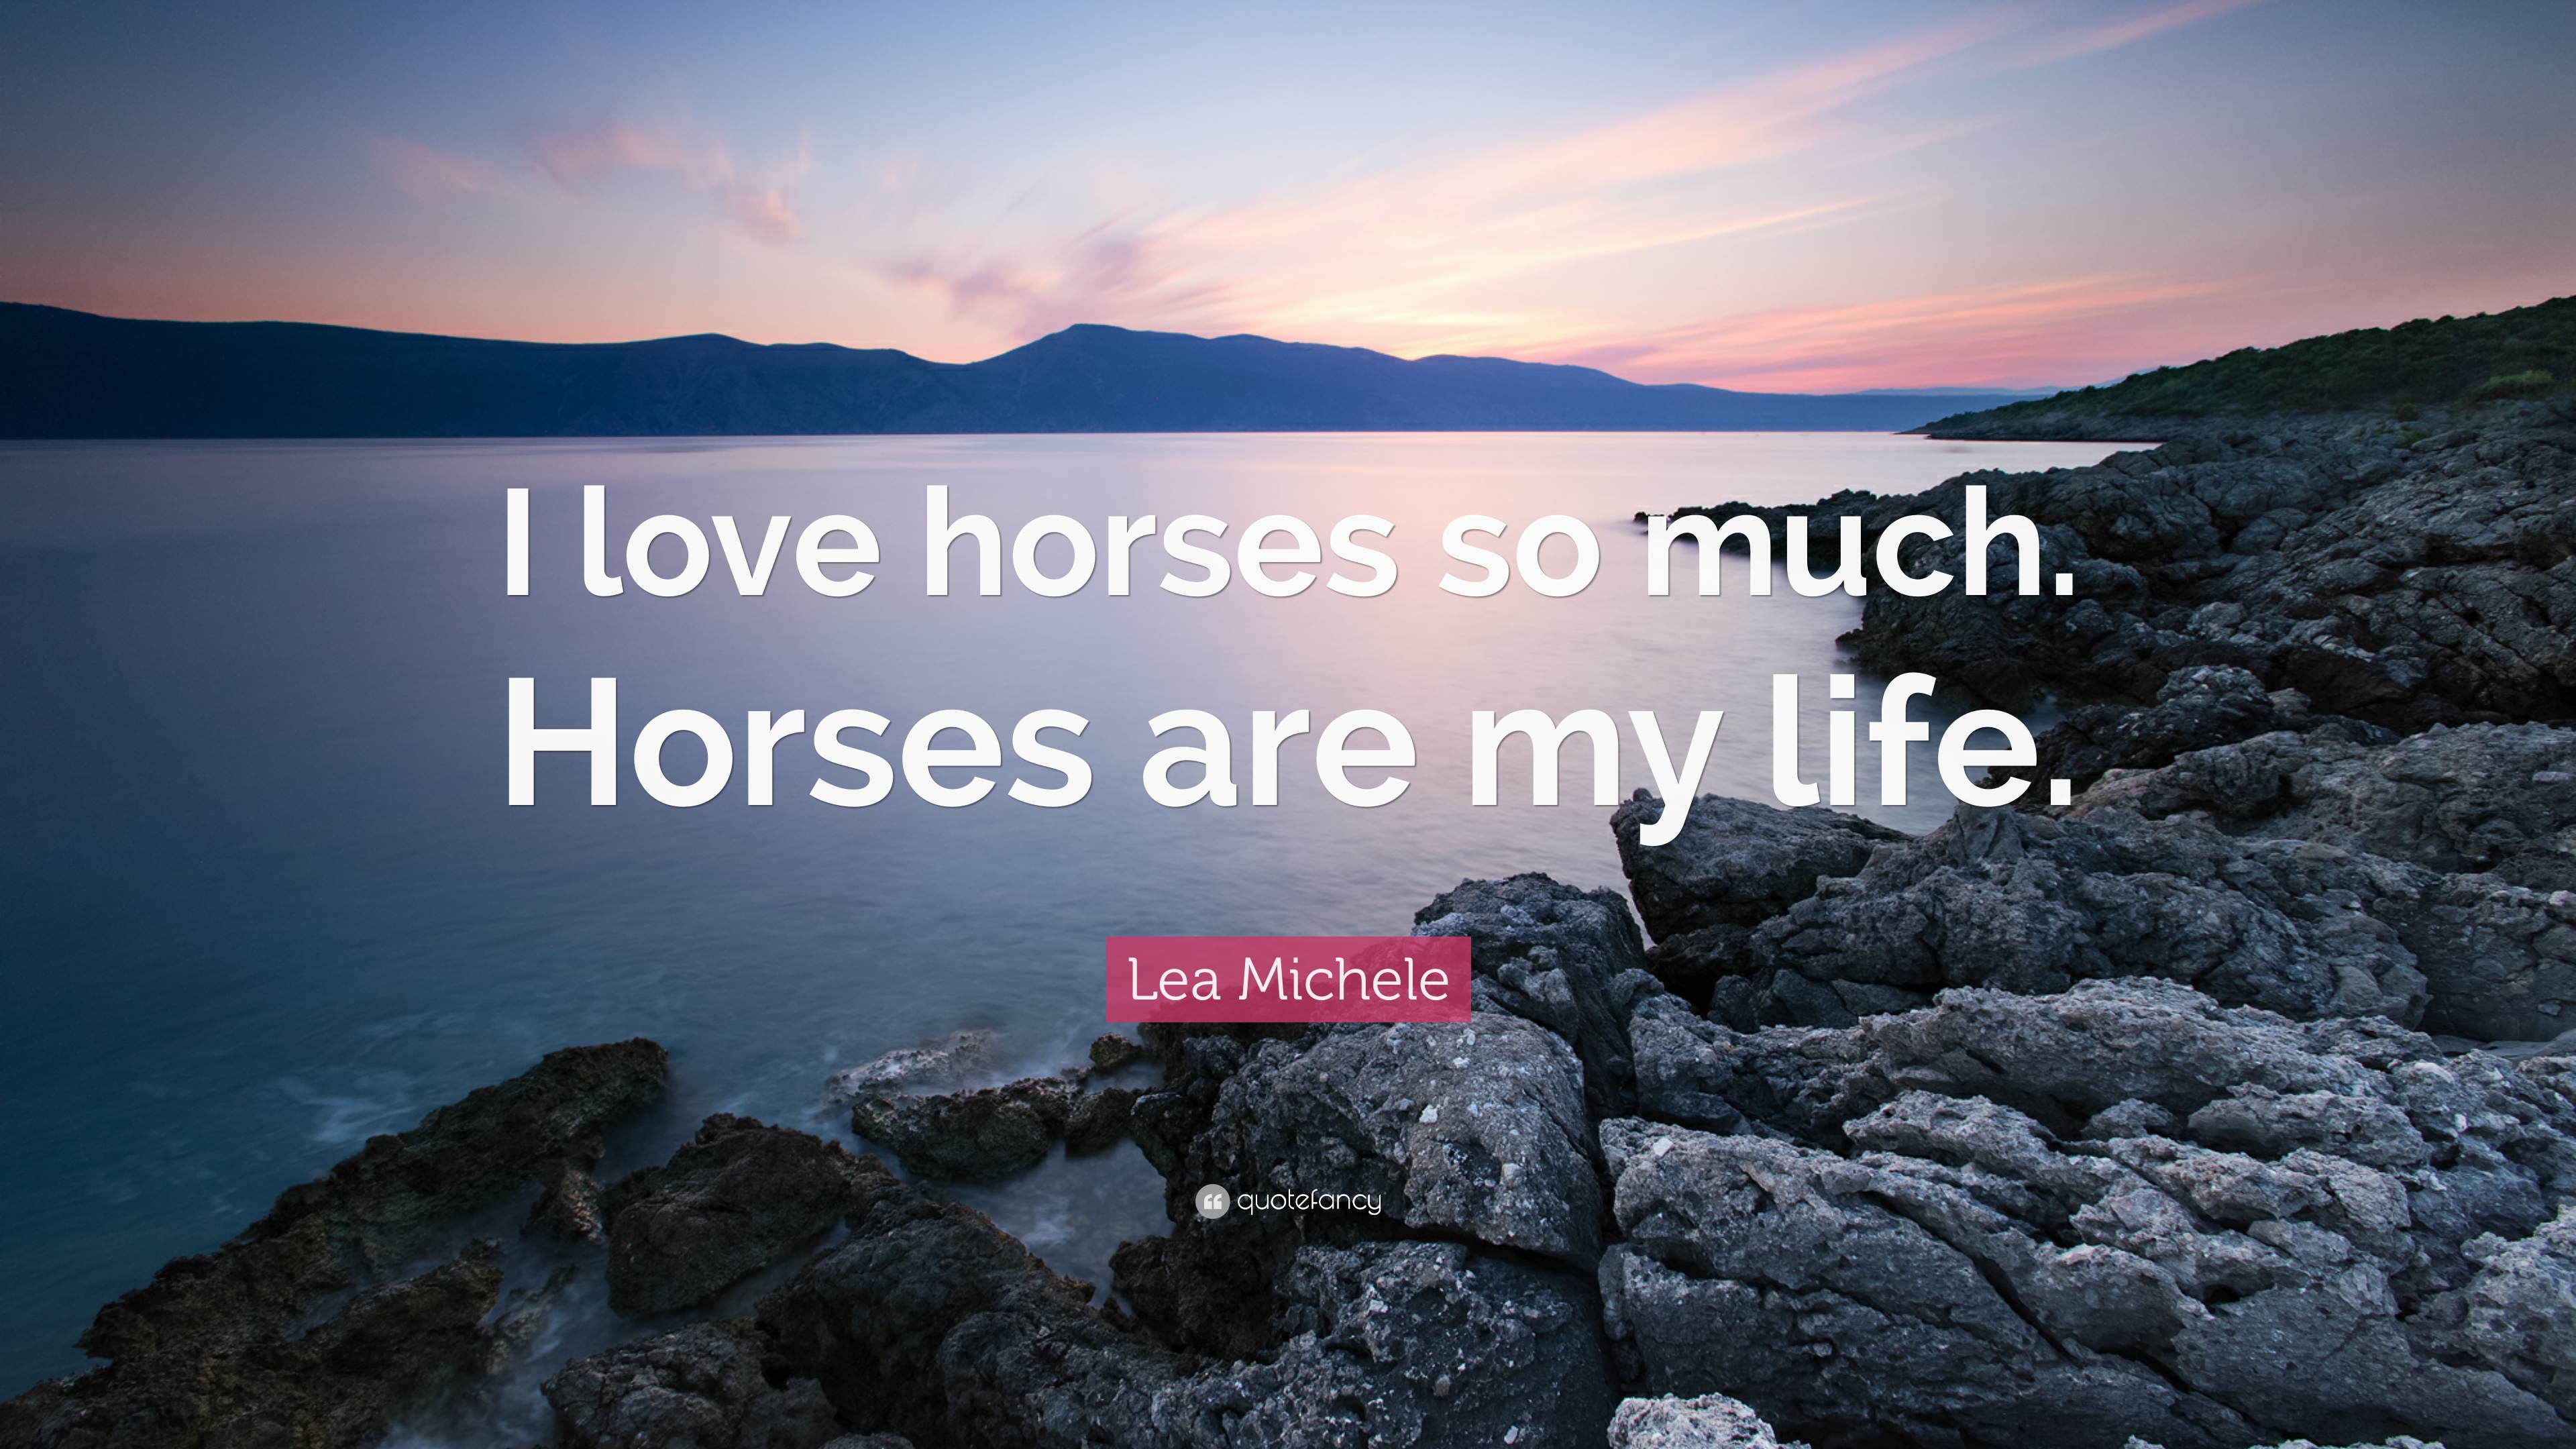 Lea Michele Quote: “I love horses so much. Horses are my life.” 7